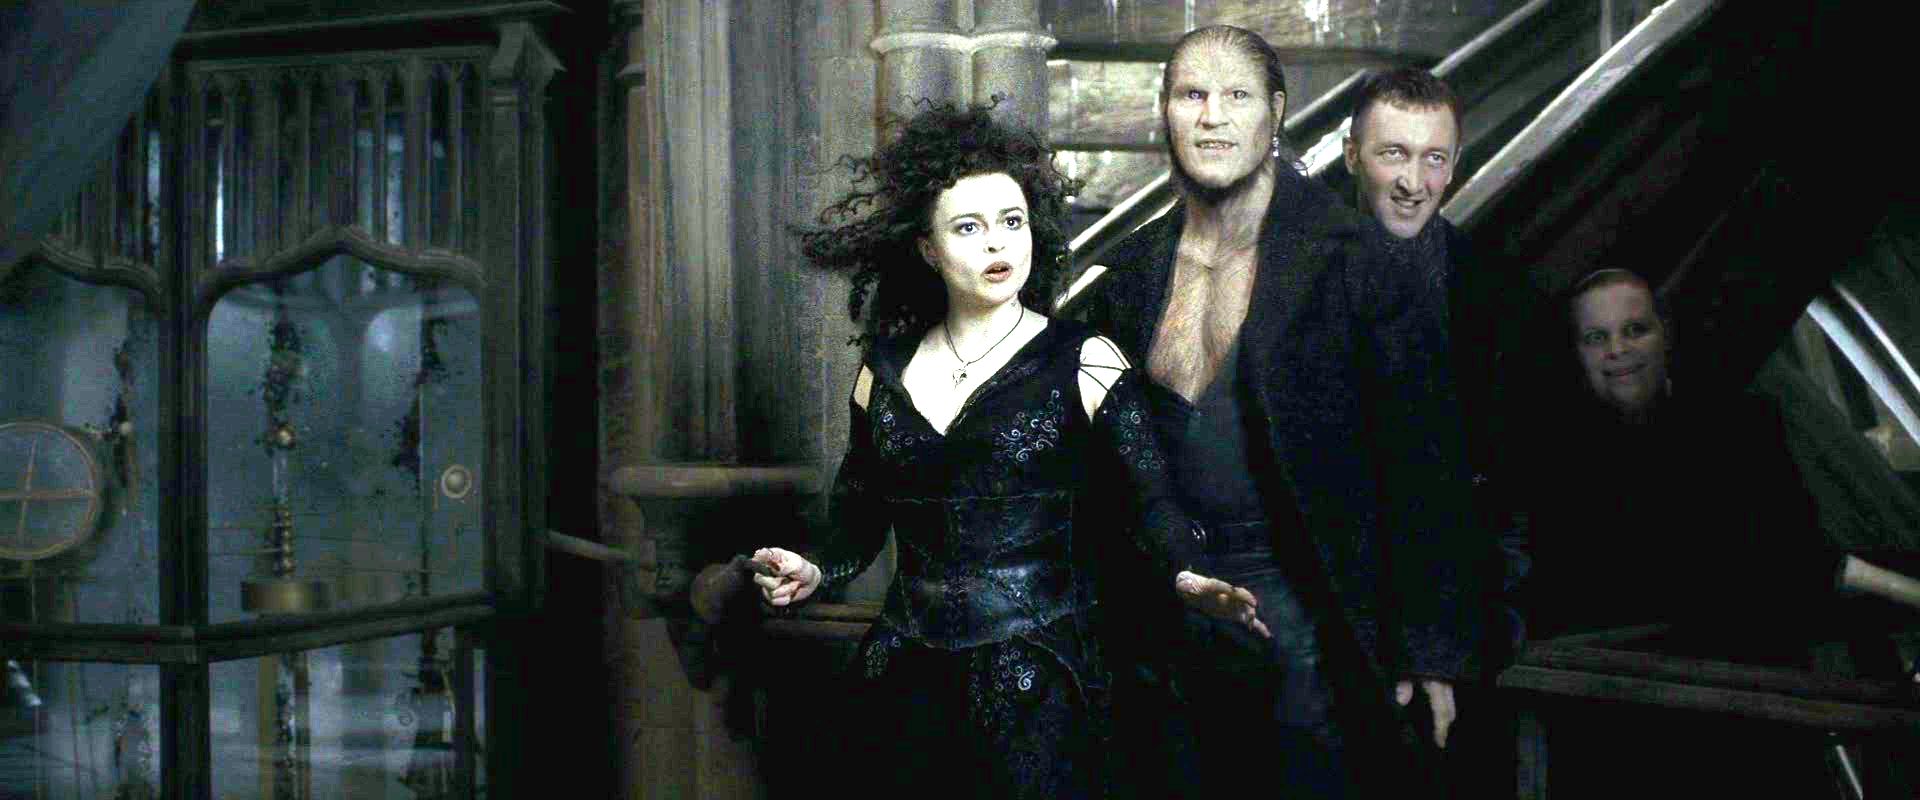 Bellatrix and Death Eaters 